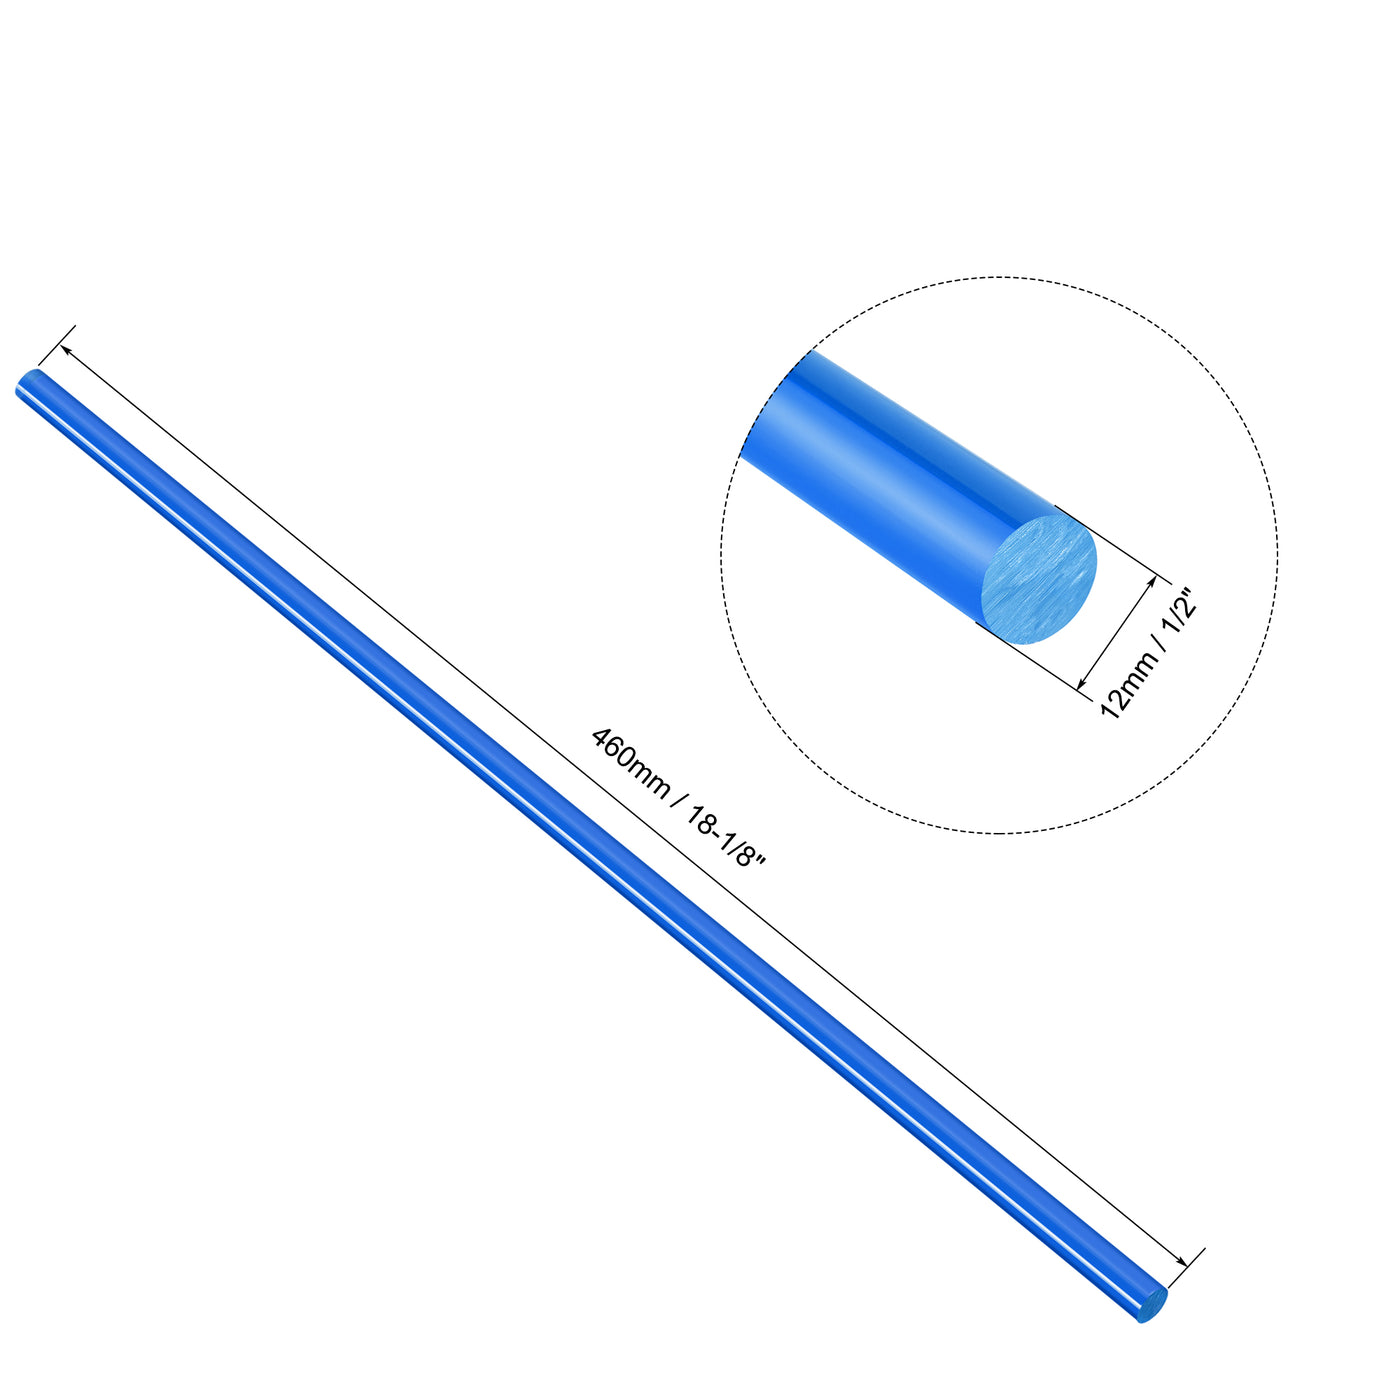 uxcell Uxcell Acrylic Round Rod, Blue,1/2" Diameter 18-1/8" Length, Solid Plastic PMMA Bar Stick 3pcs